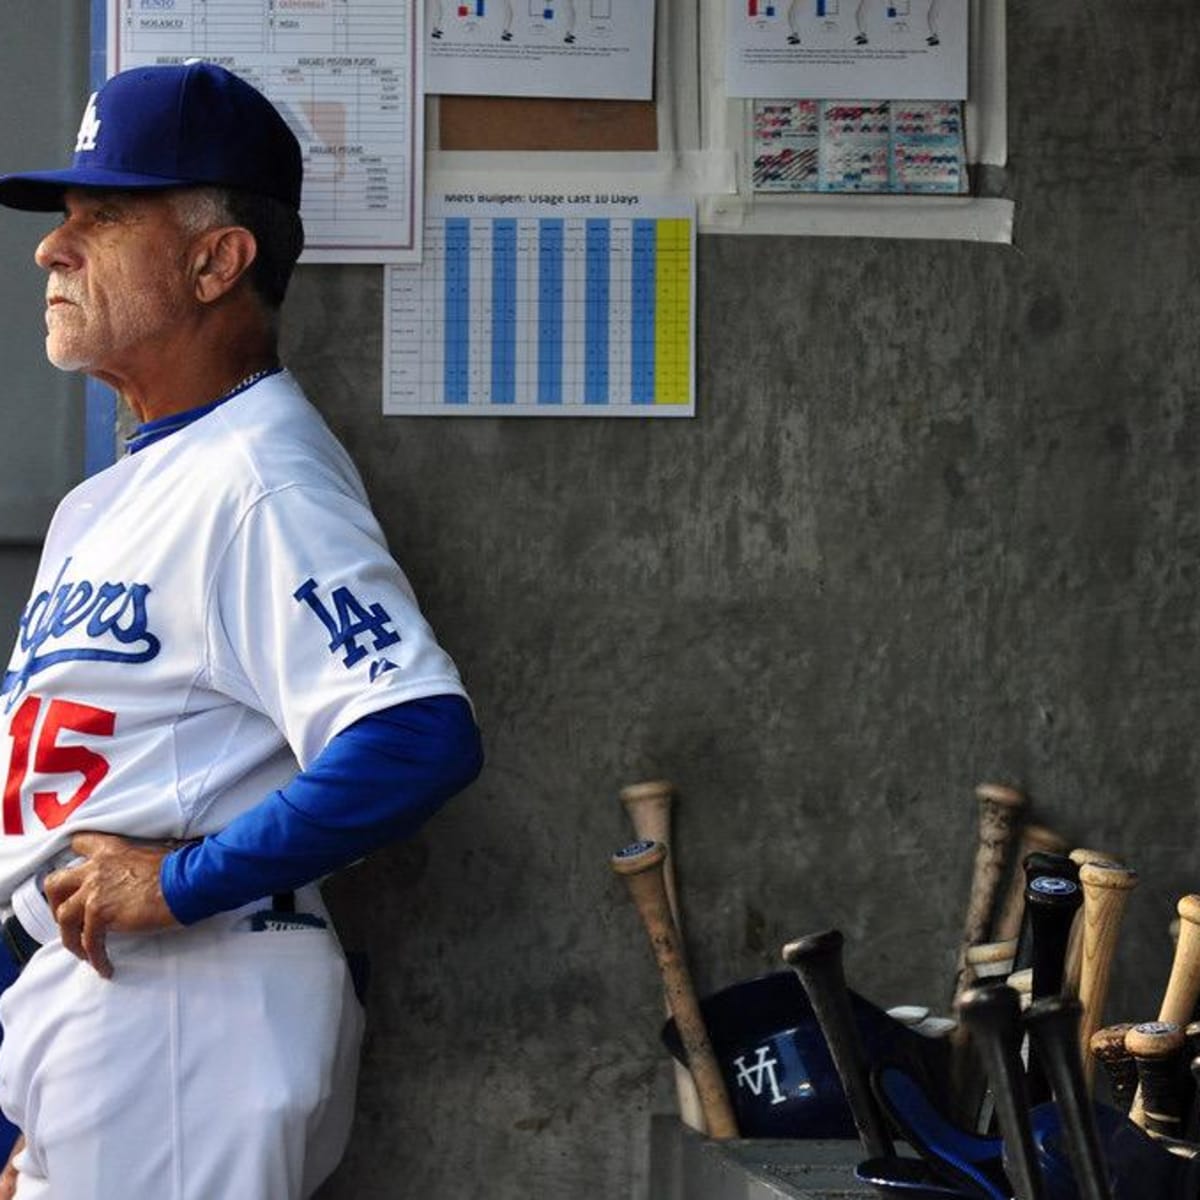 Dodgers News: Davey Lopes Announces Retirement From Baseball